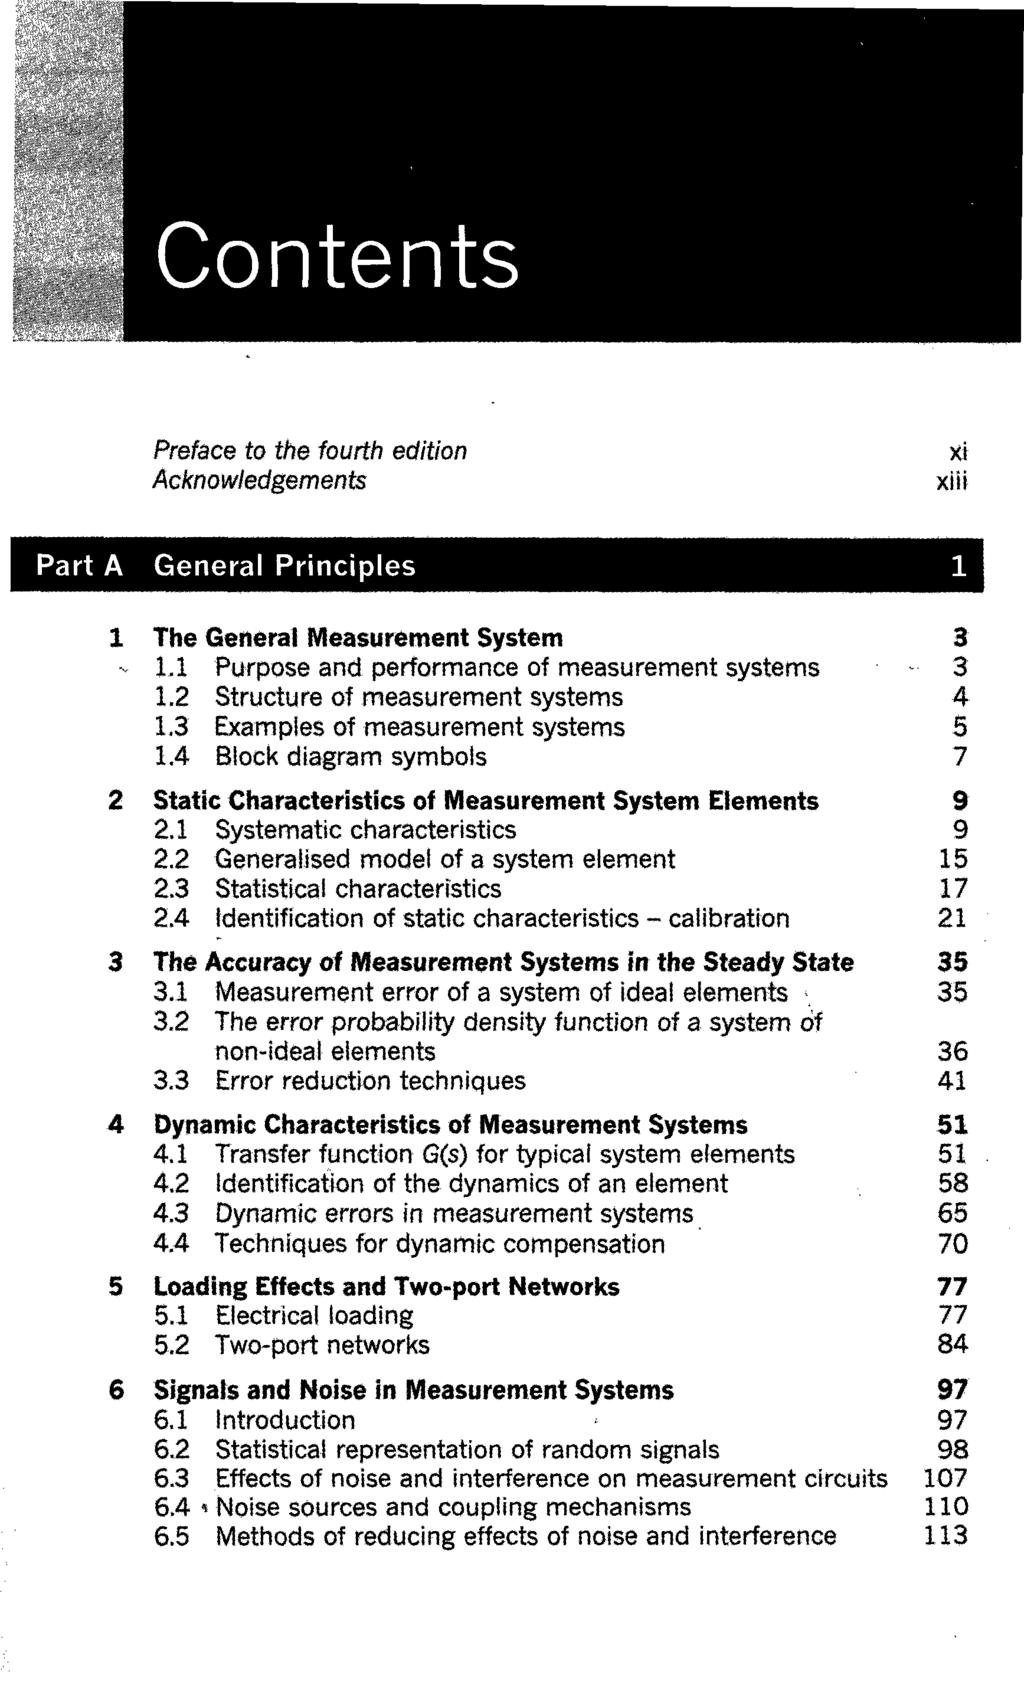 Contents Preface to the fourth edition Acknowledgements XI xiii Part A General Principles The General Measurement System 3 1.1 Purpose and performance of measurement systems - 3 1.